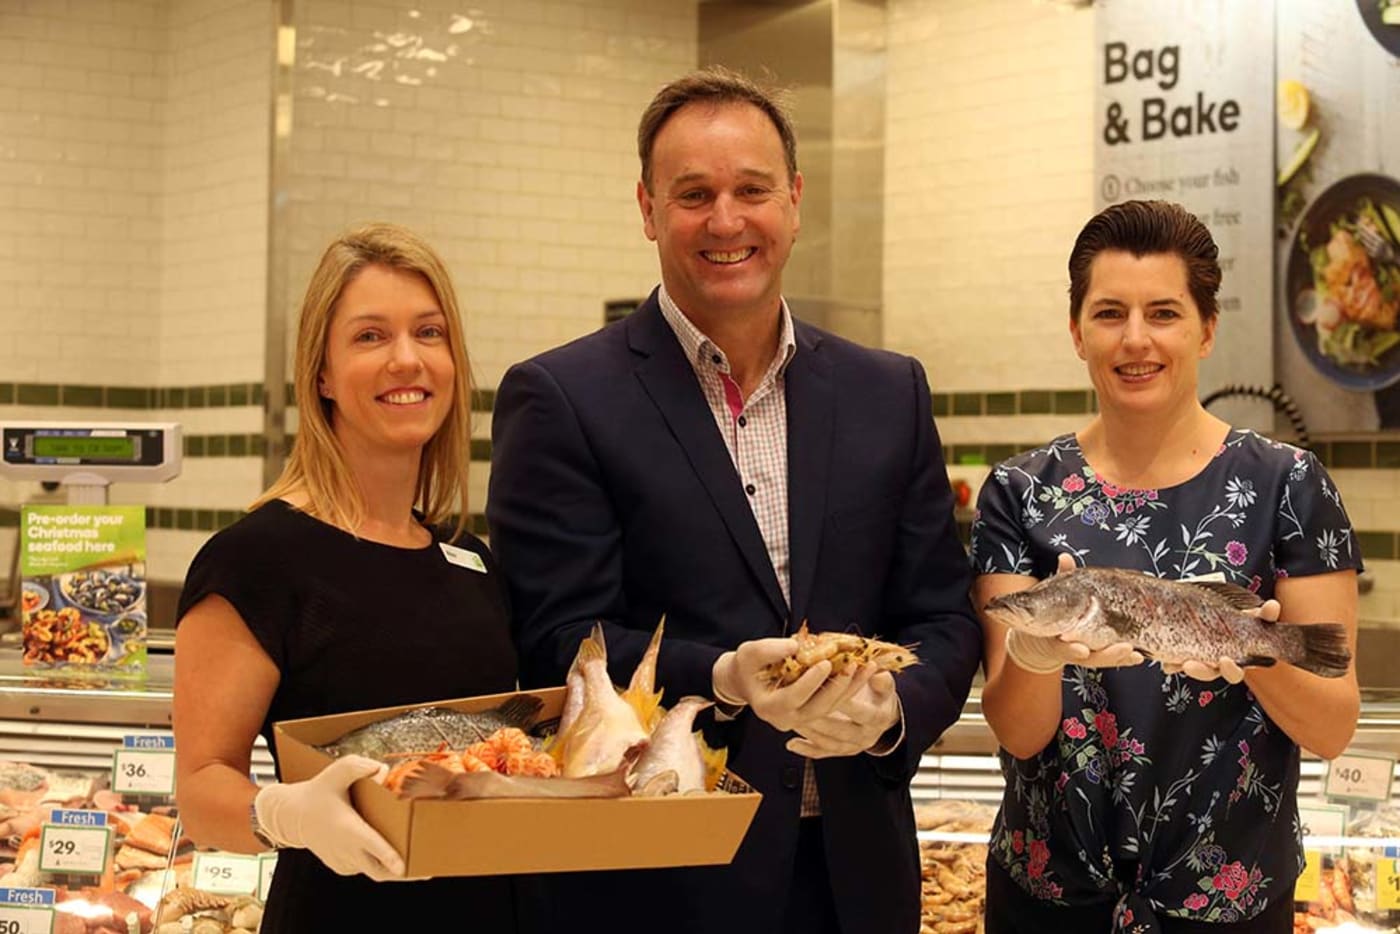 From L-R:  Alex Holt, Woolworths General Manager Quality, Health & Sustainability, Dermot, Serena Anson-Cope, Woolworths Seafood Merchandise Manager.